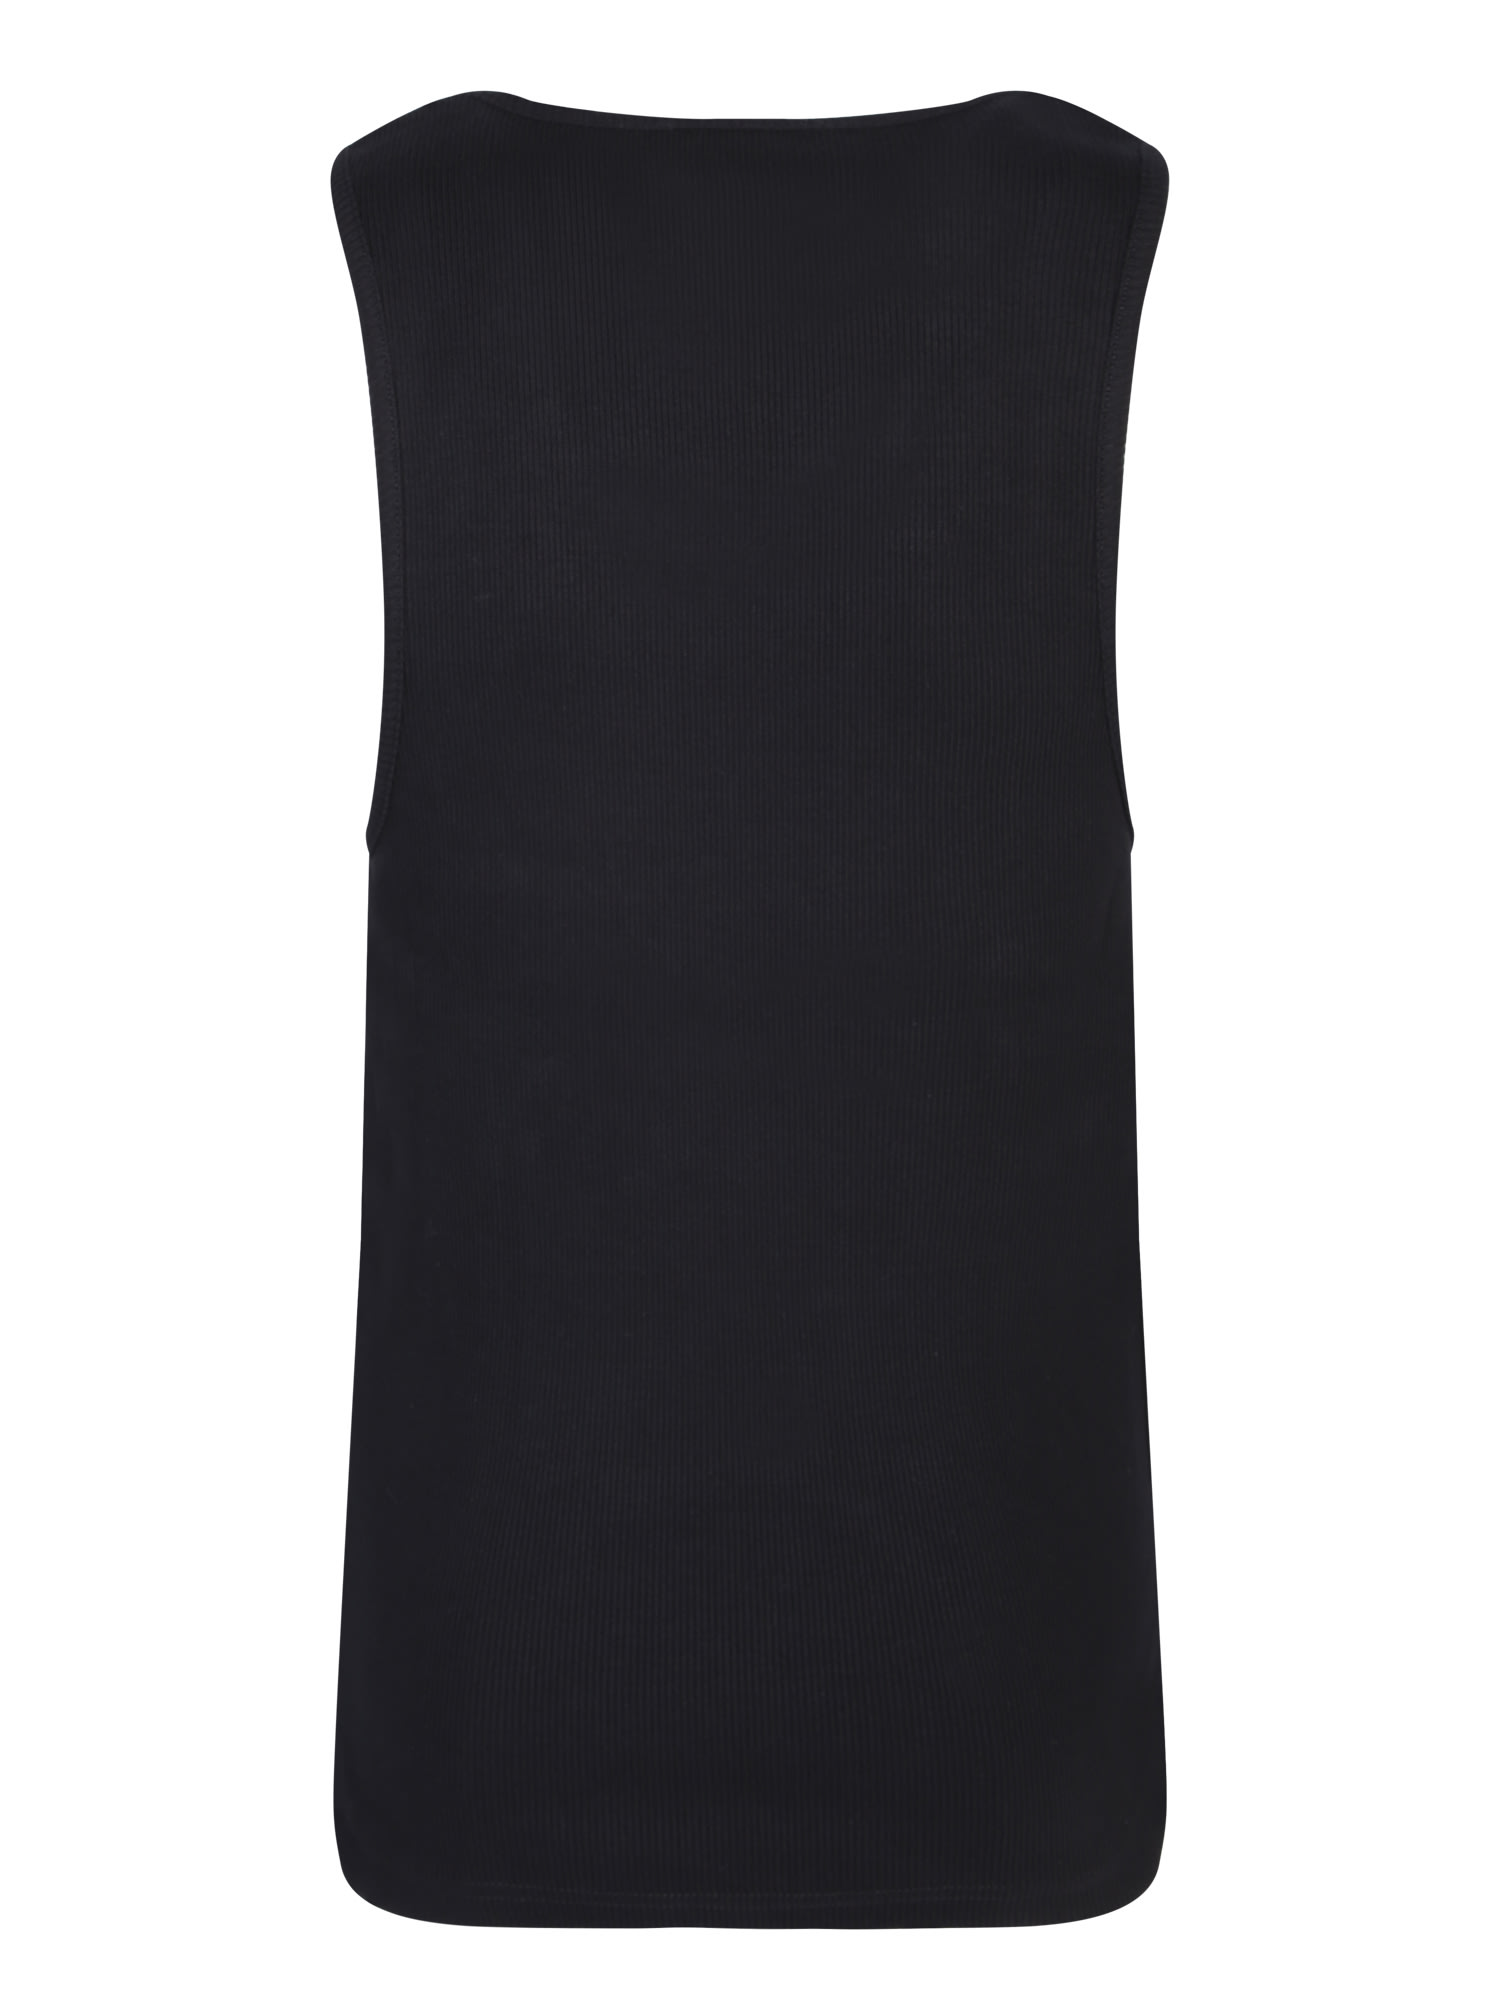 Shop Jw Anderson Embroidered Logo Black Tank Top